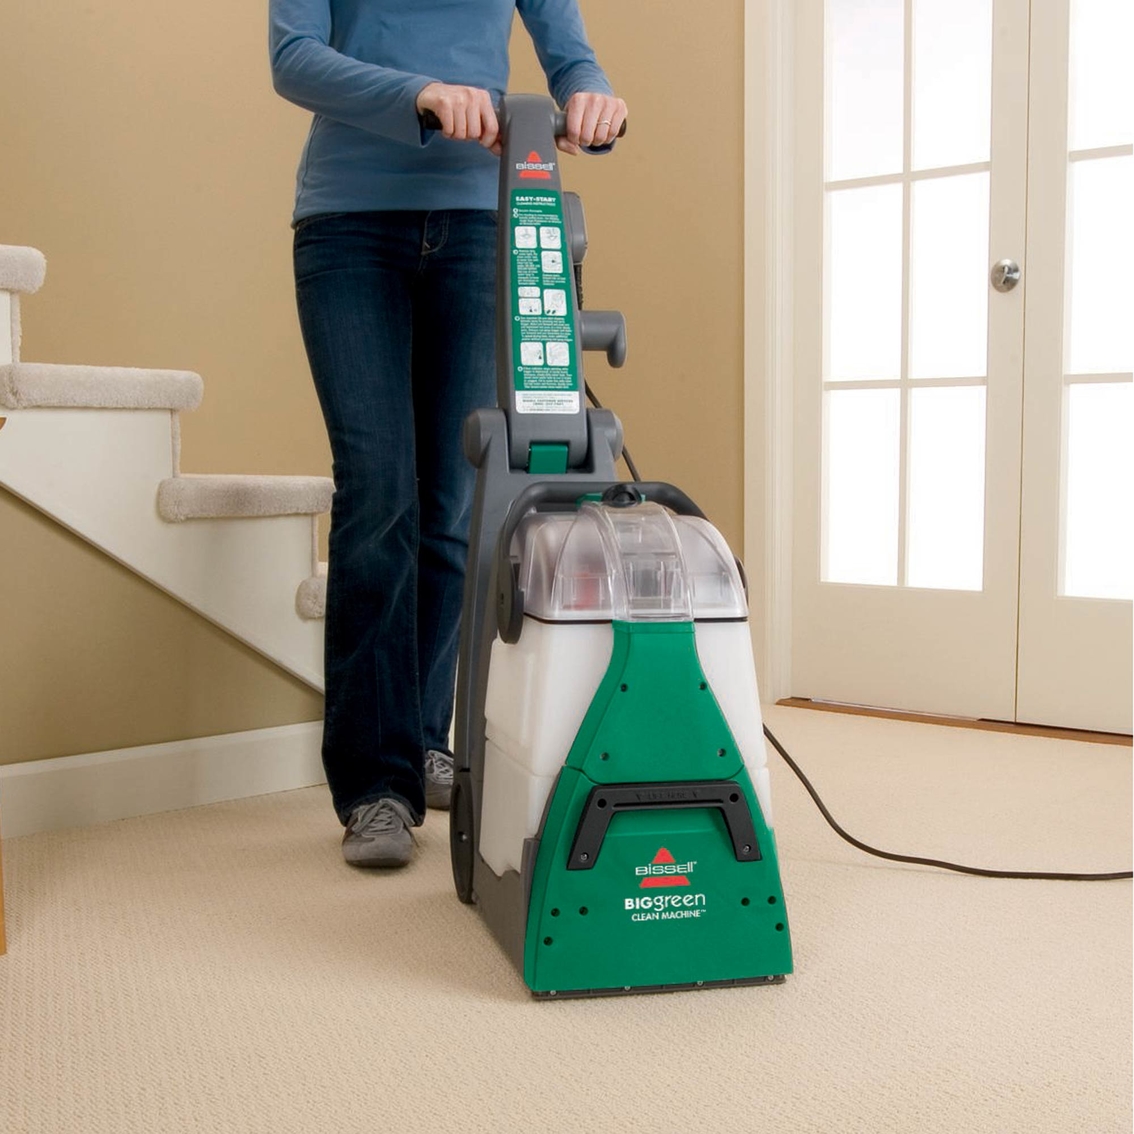 Bissell Big Green Machine Professional Carpet Cleaner - Image 5 of 6